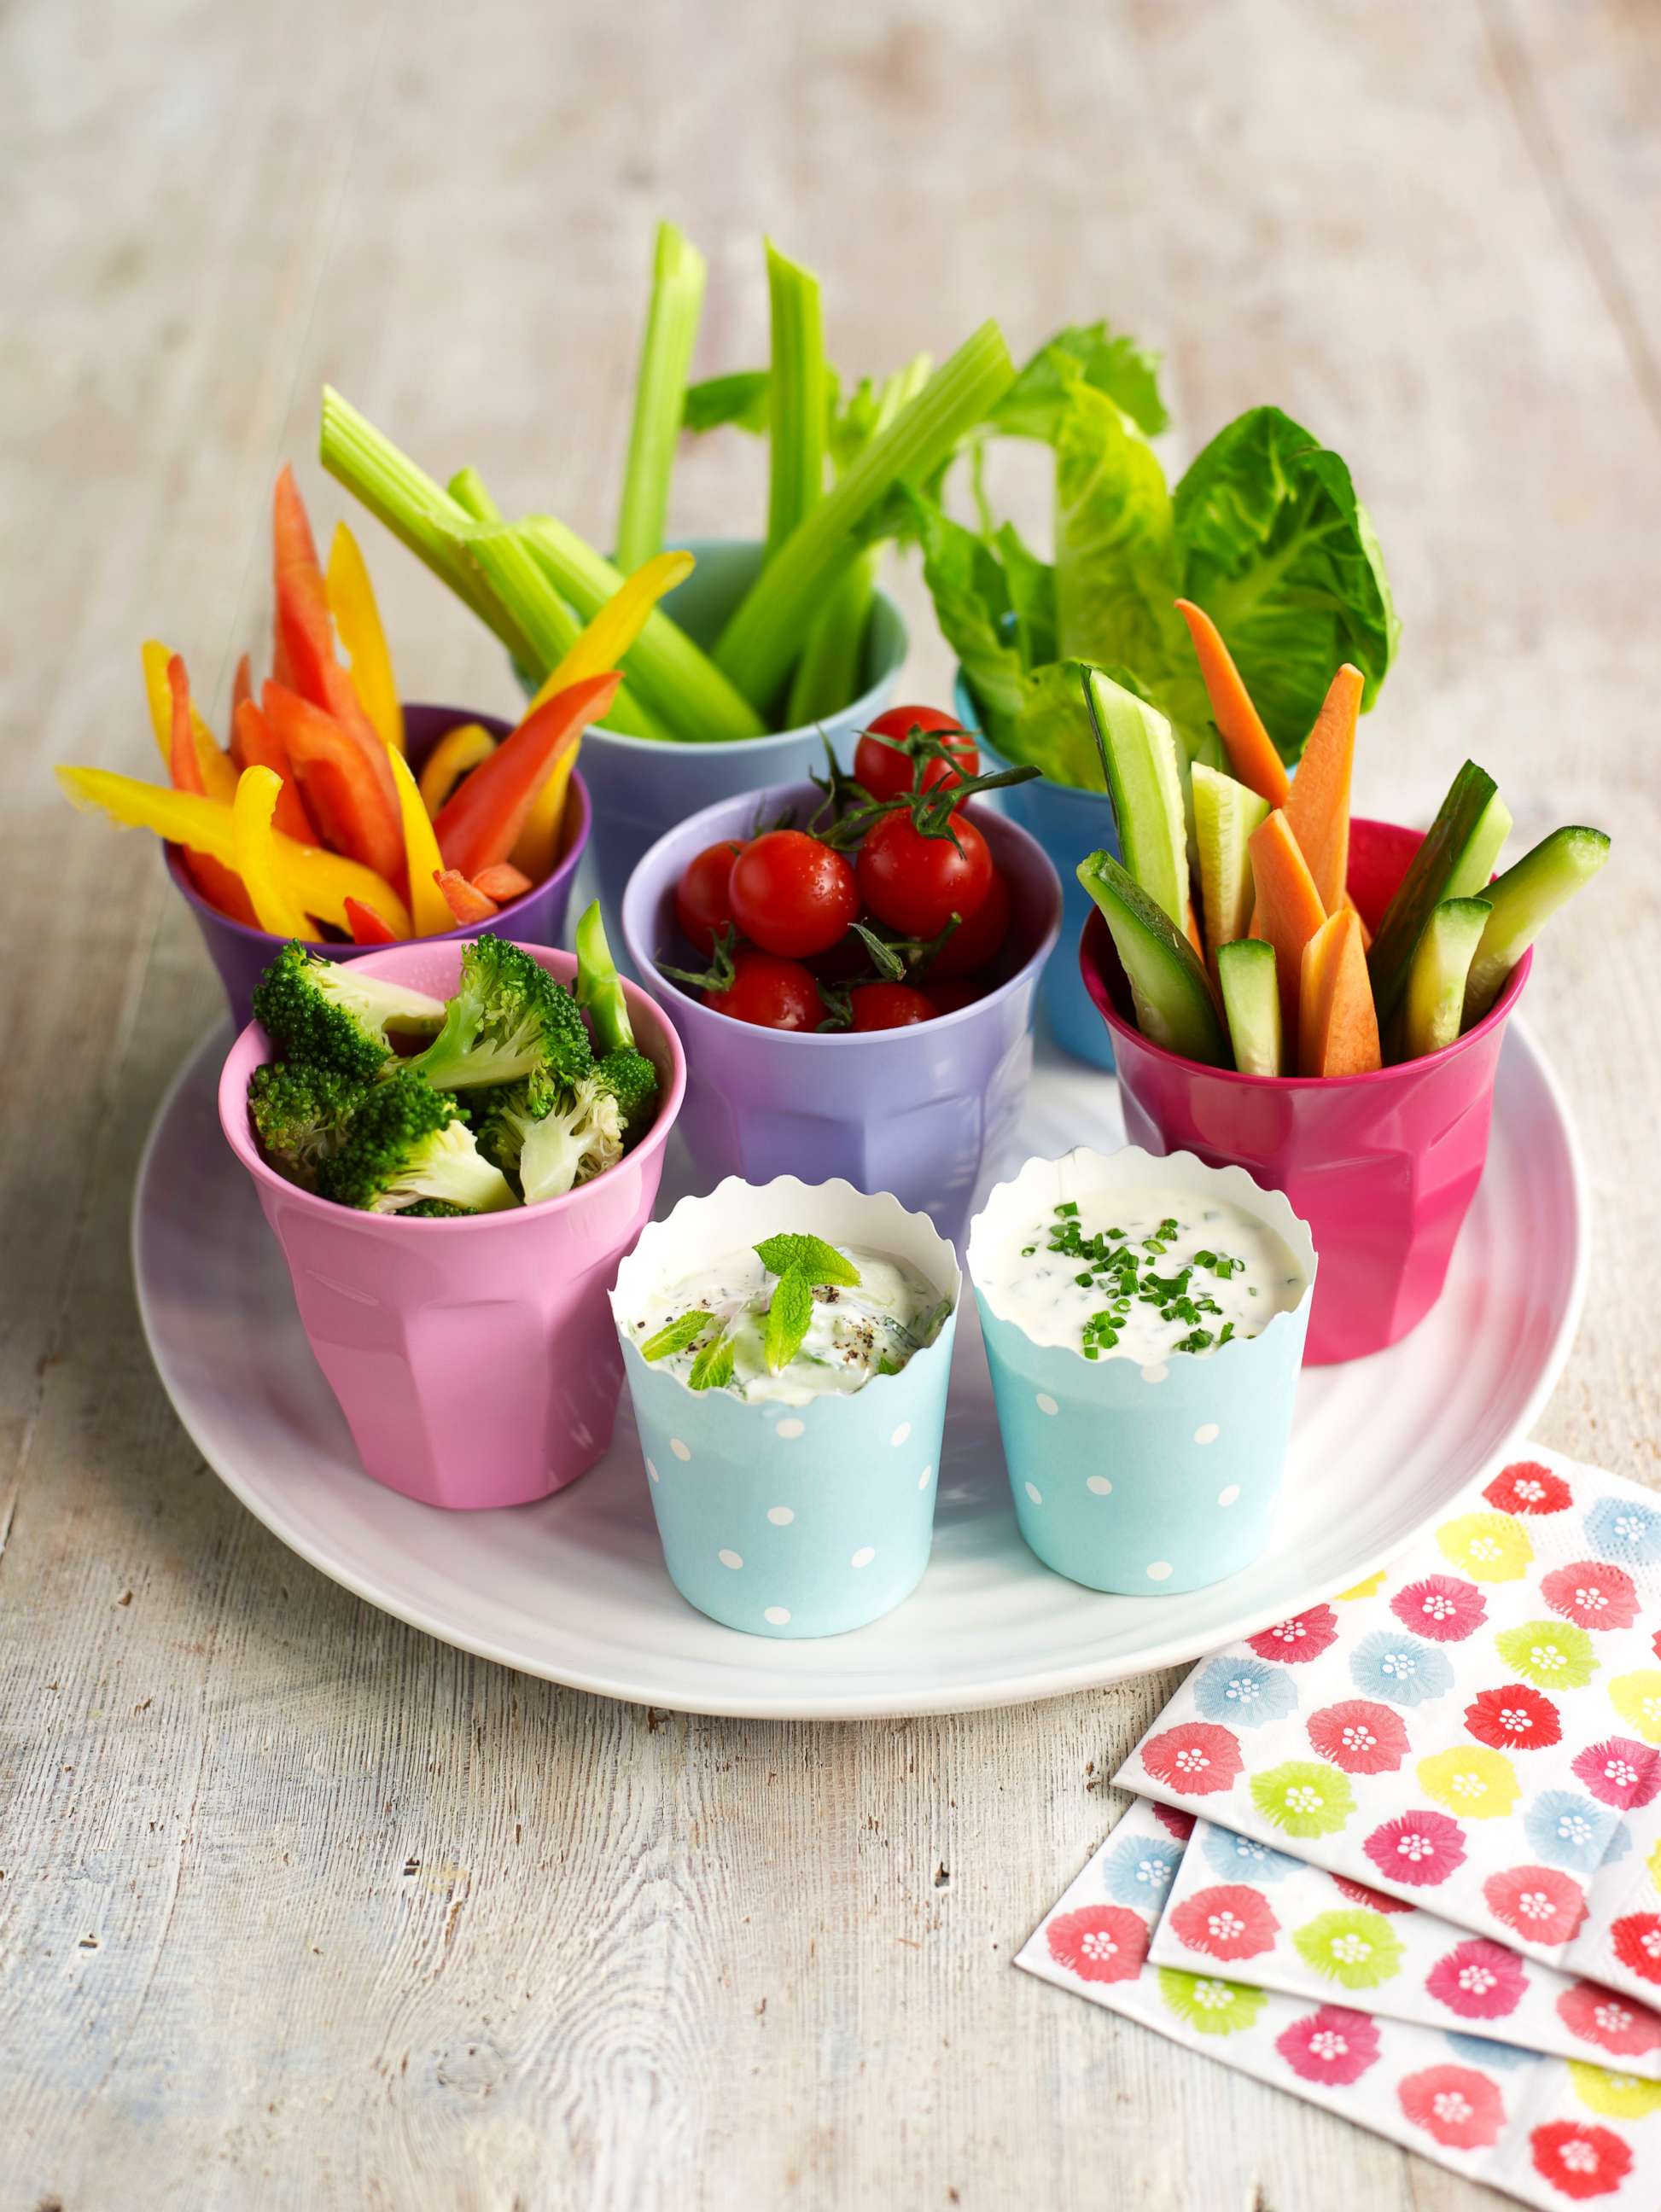 PHOTO: A plate of crudites and dips appear in this undated stock photo.